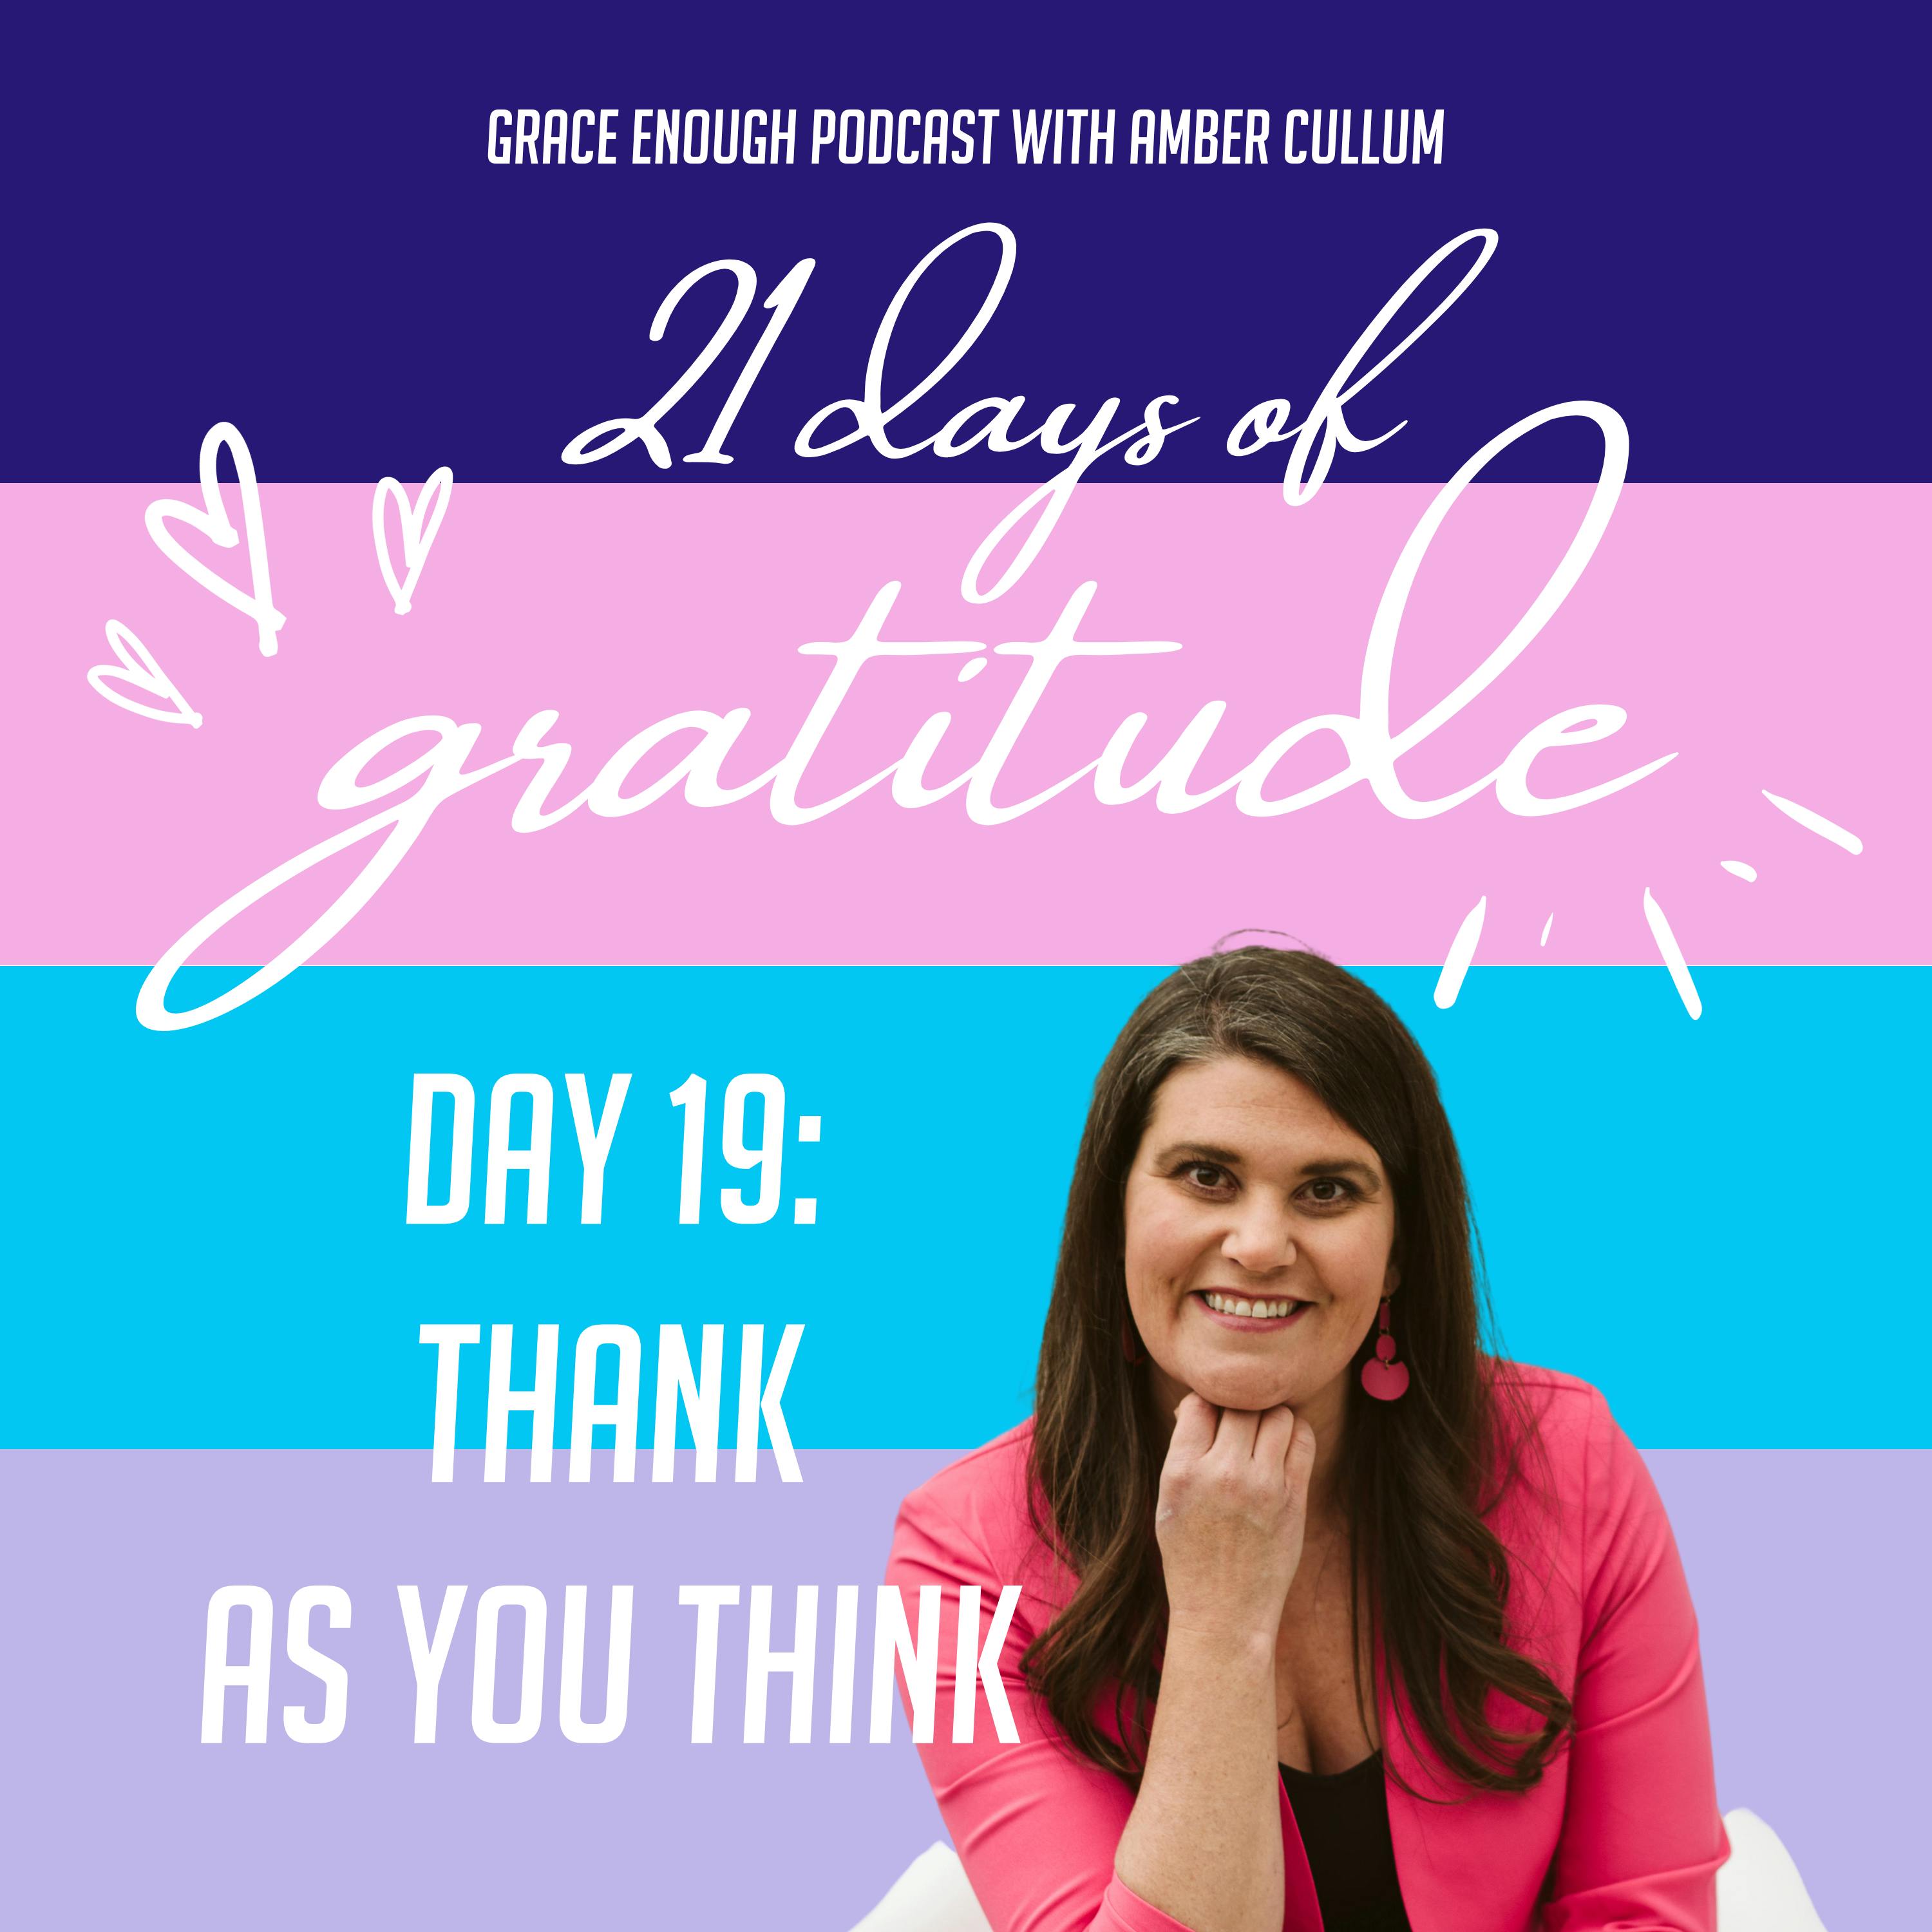 19/21 Days of Gratitude: Thank as You Think